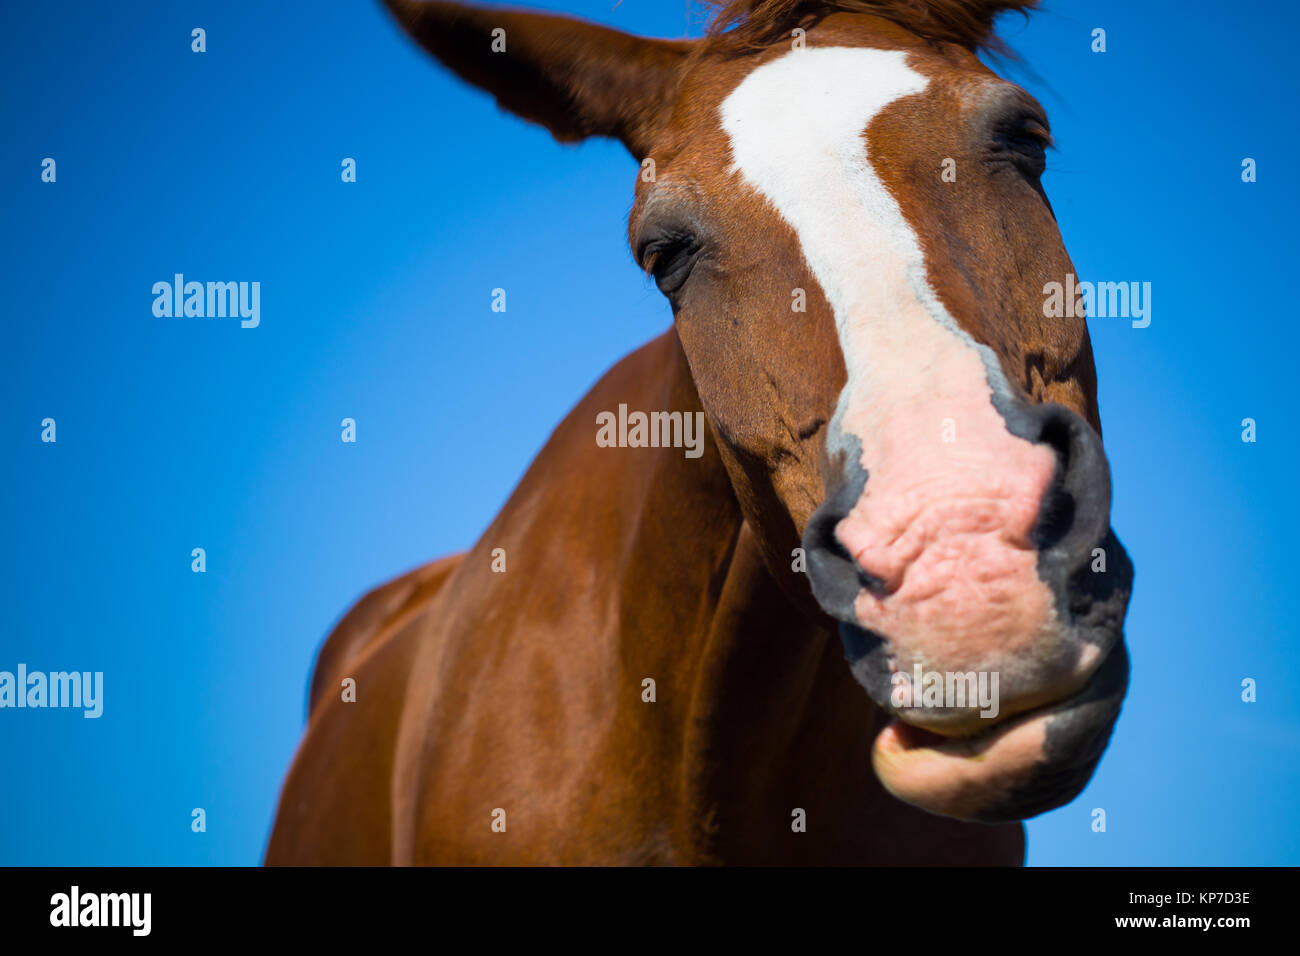 A brown horse shaking its head Stock Photo